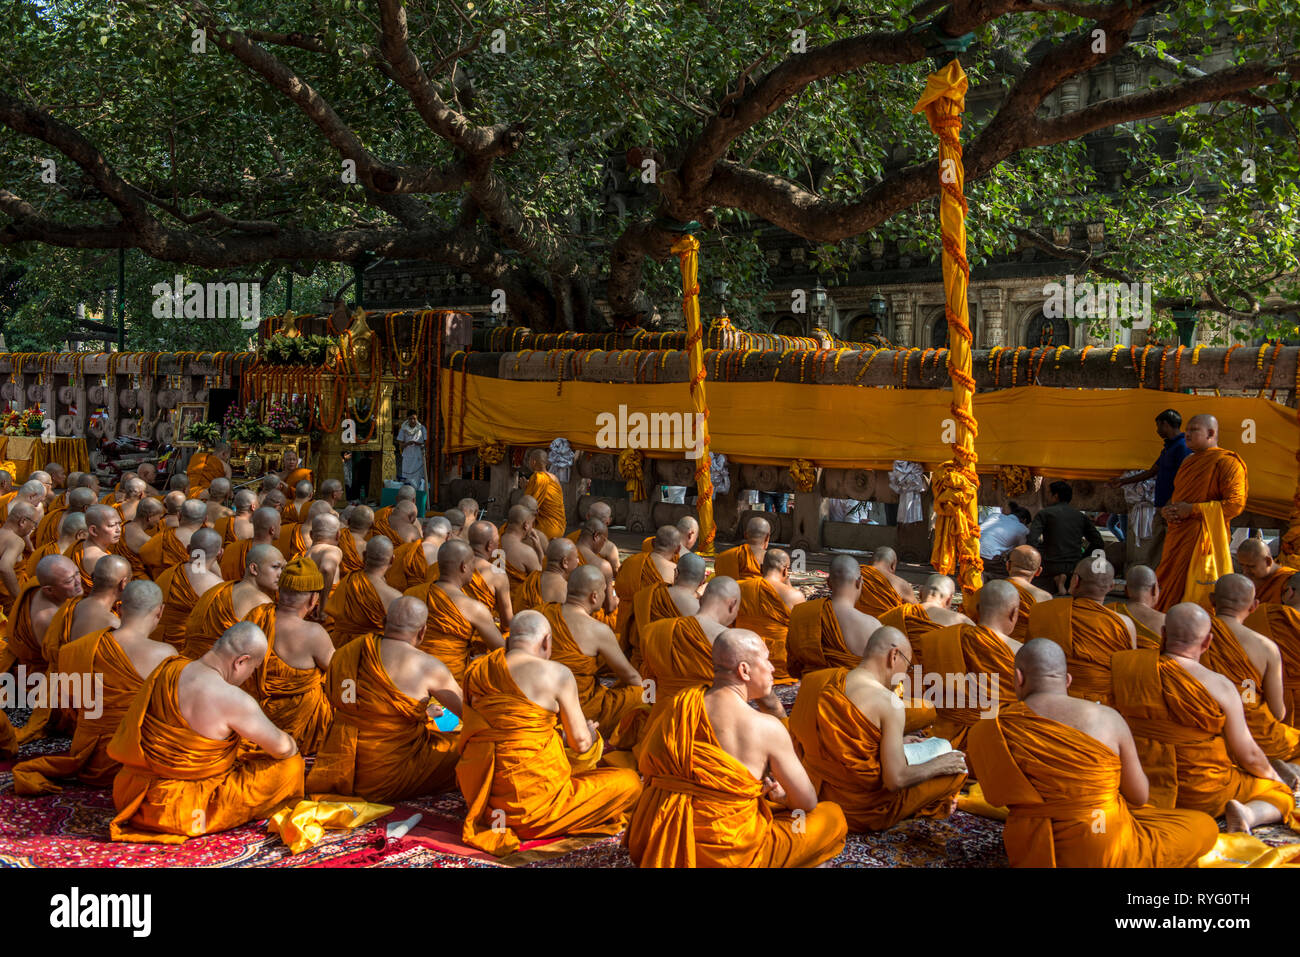 INDIA, BODH GAYA, Monks praying in front of the holy bodhi tree were Buddha experienced enlightenment Stock Photo